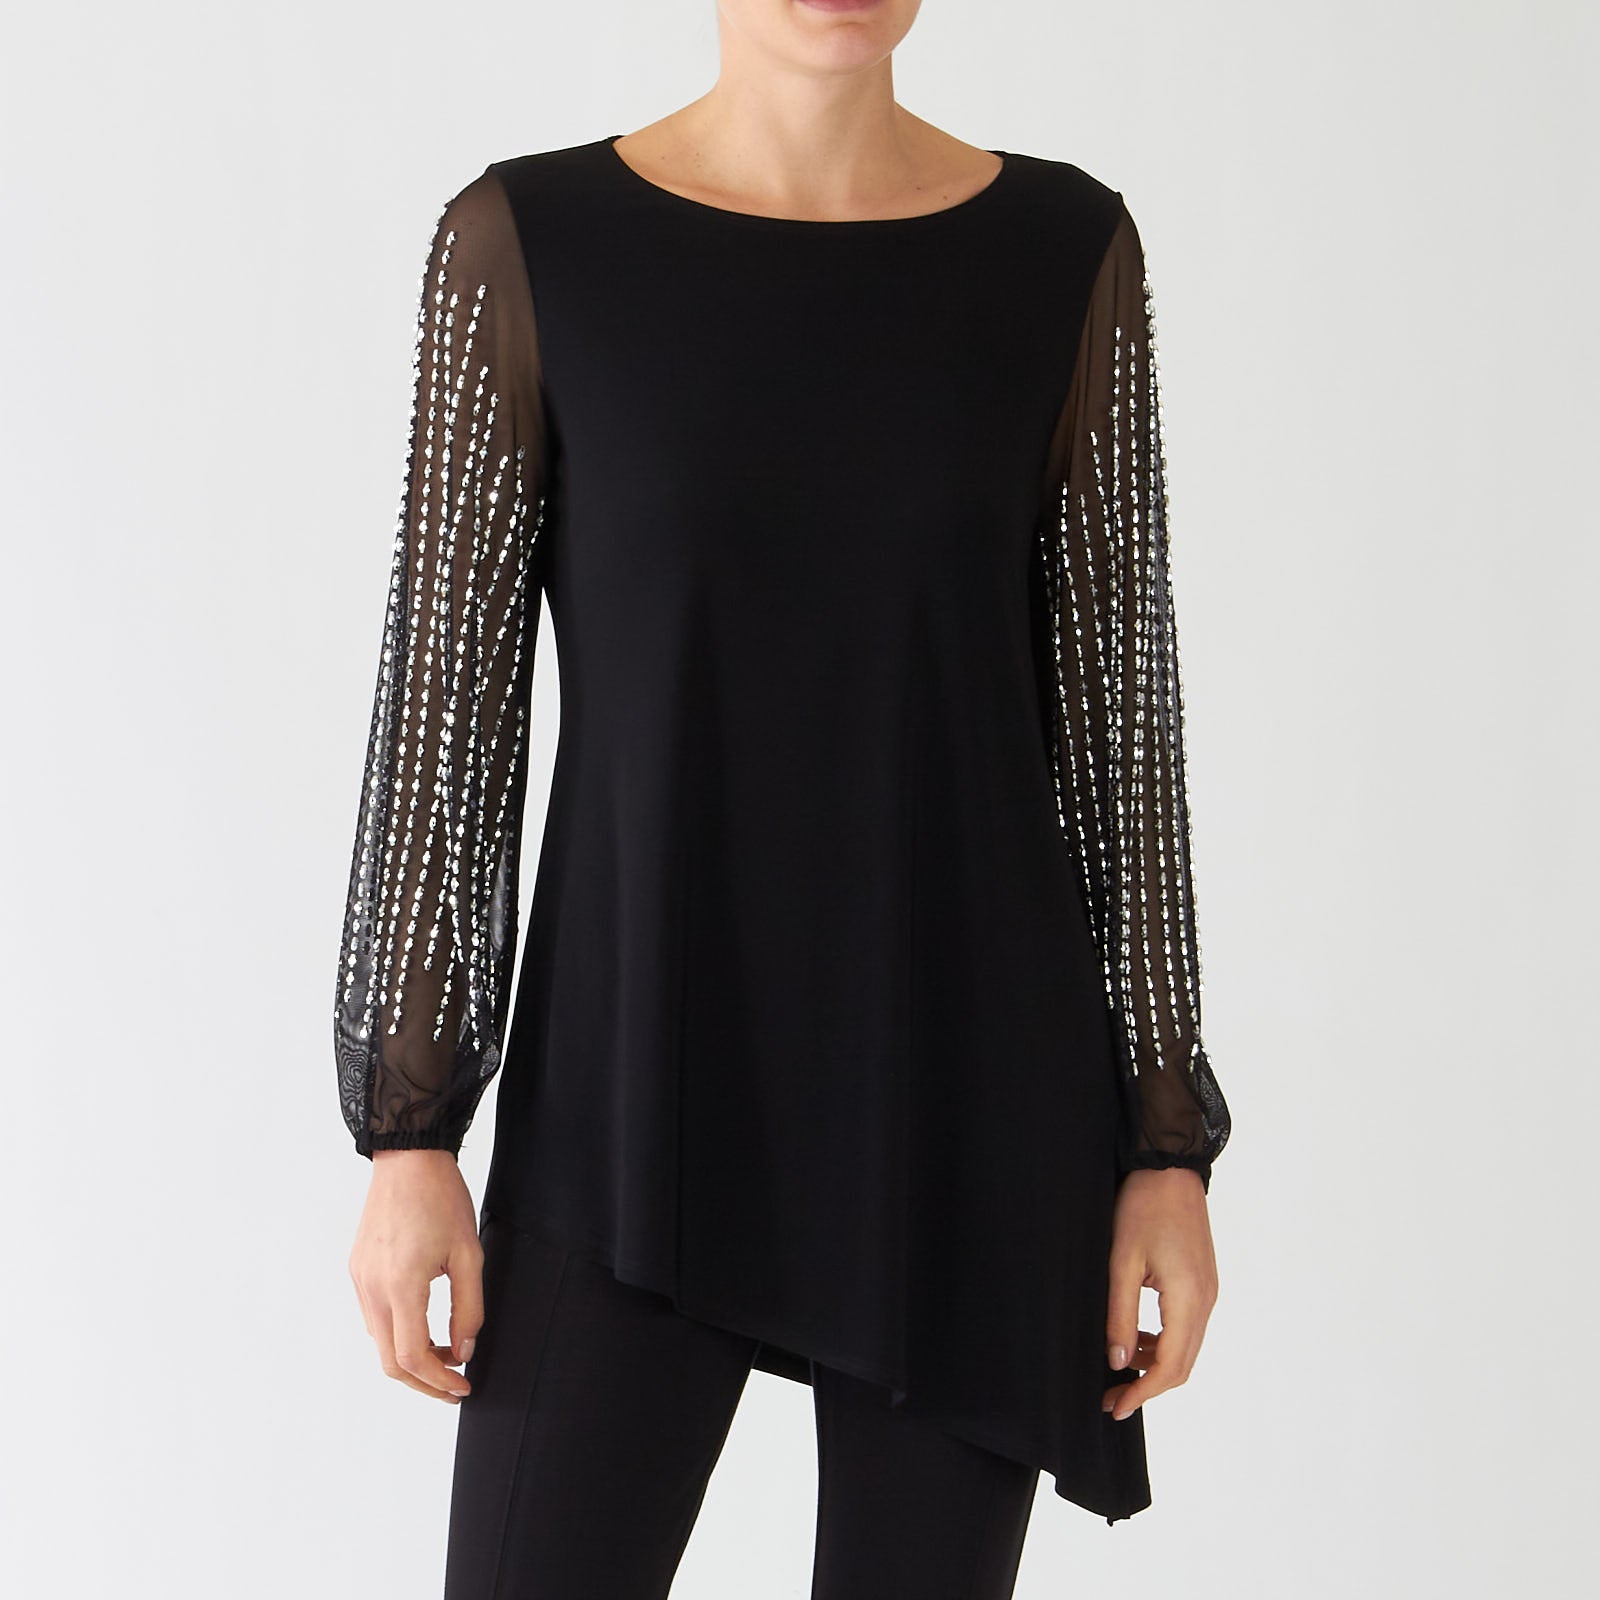 Black Tunic With Beaded Sheer Sleeves